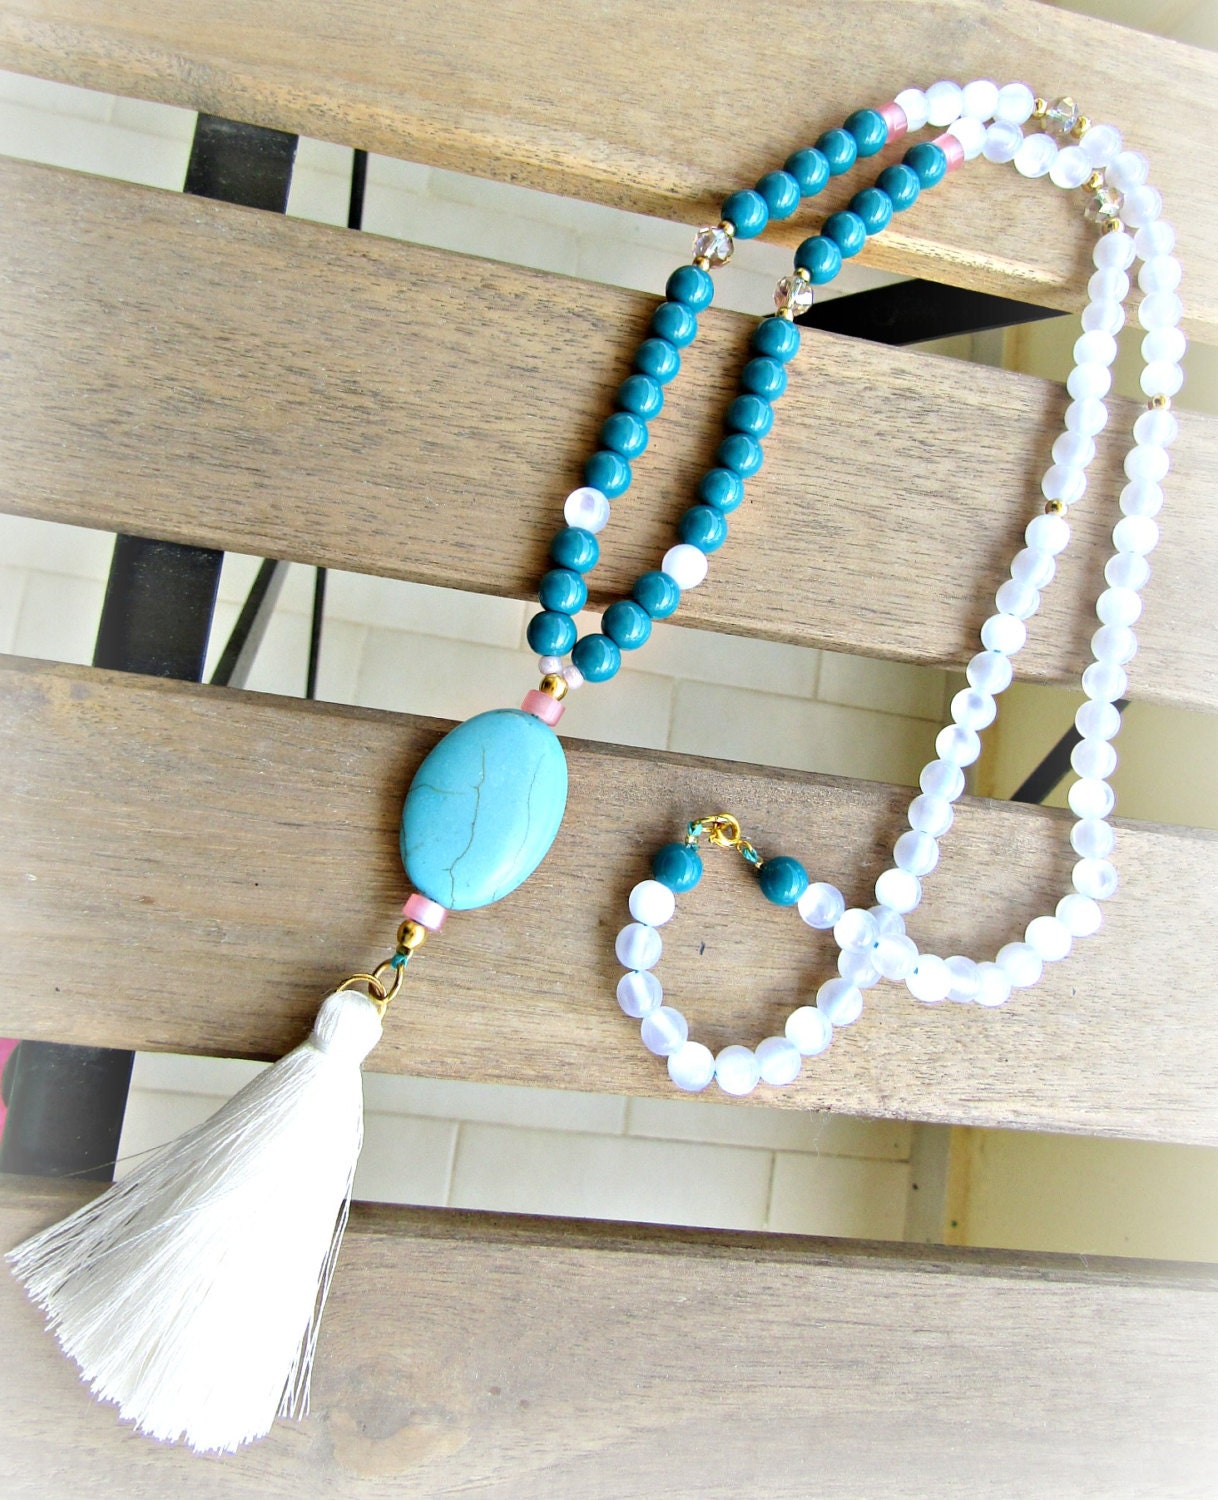 How to Make a DIY Beaded Tassel Necklace | Sew Bake Decorate